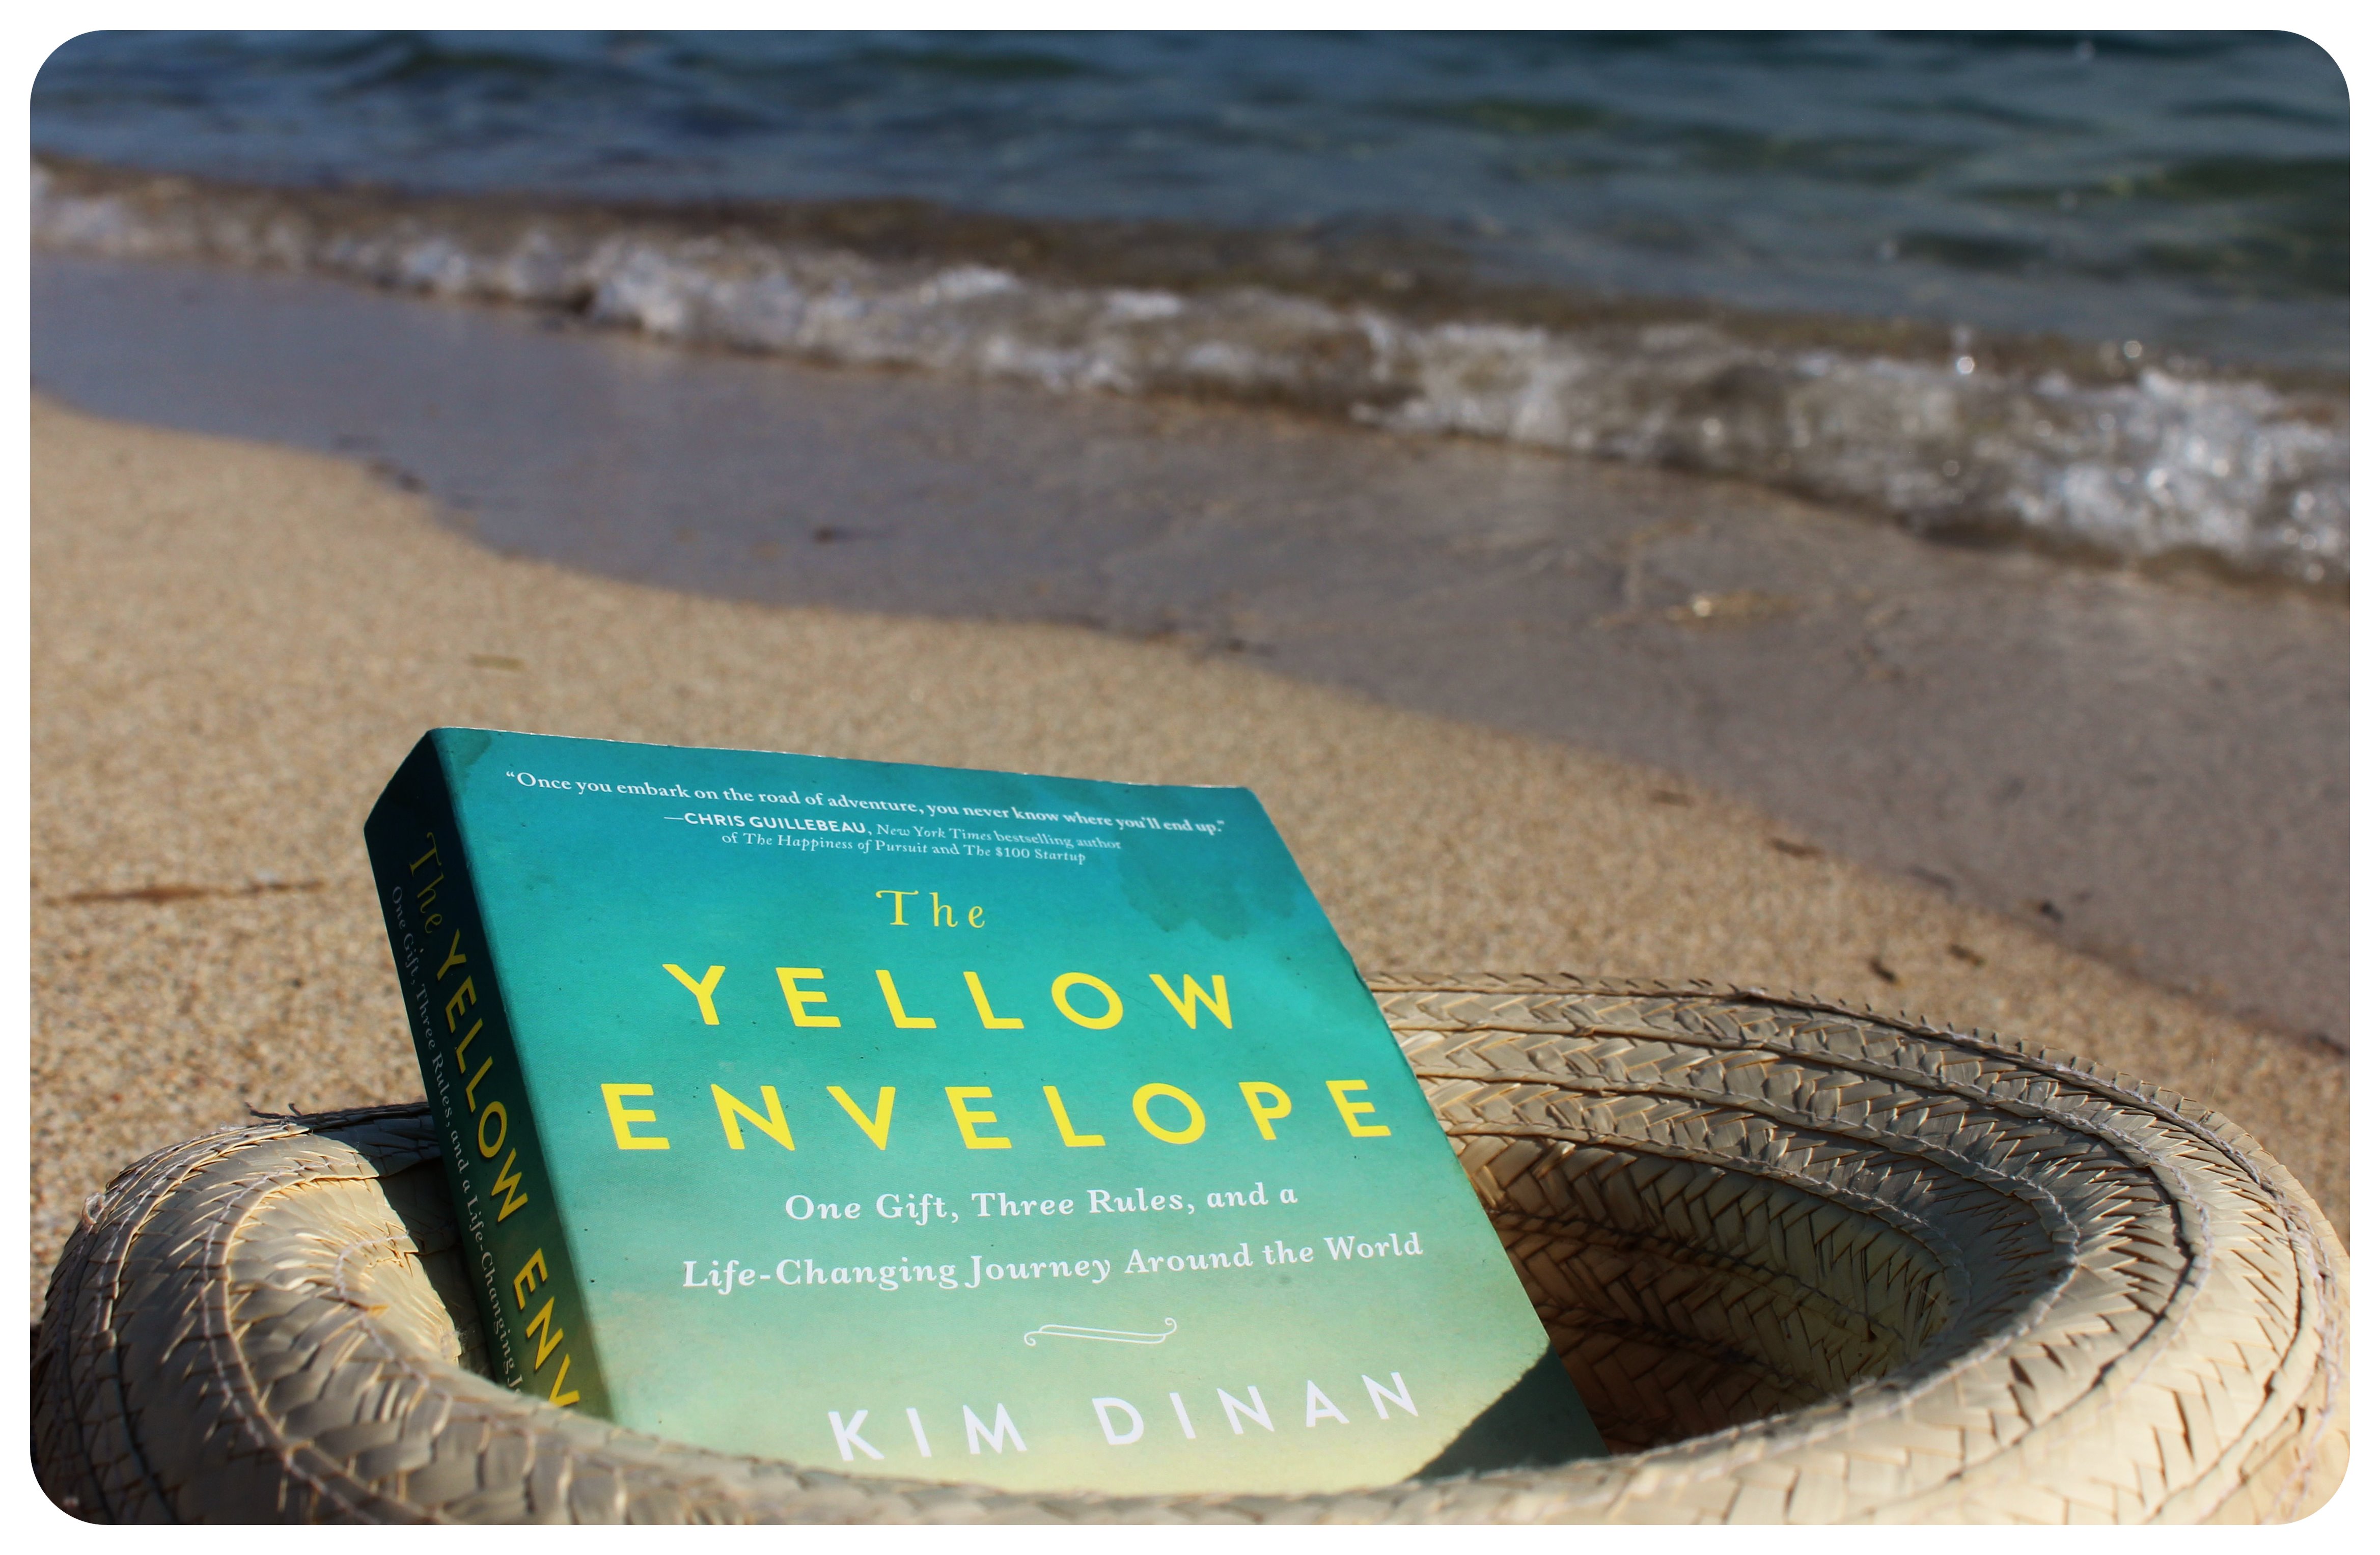 The Story Of The Yellow Envelope (+ Book Giveaway!)